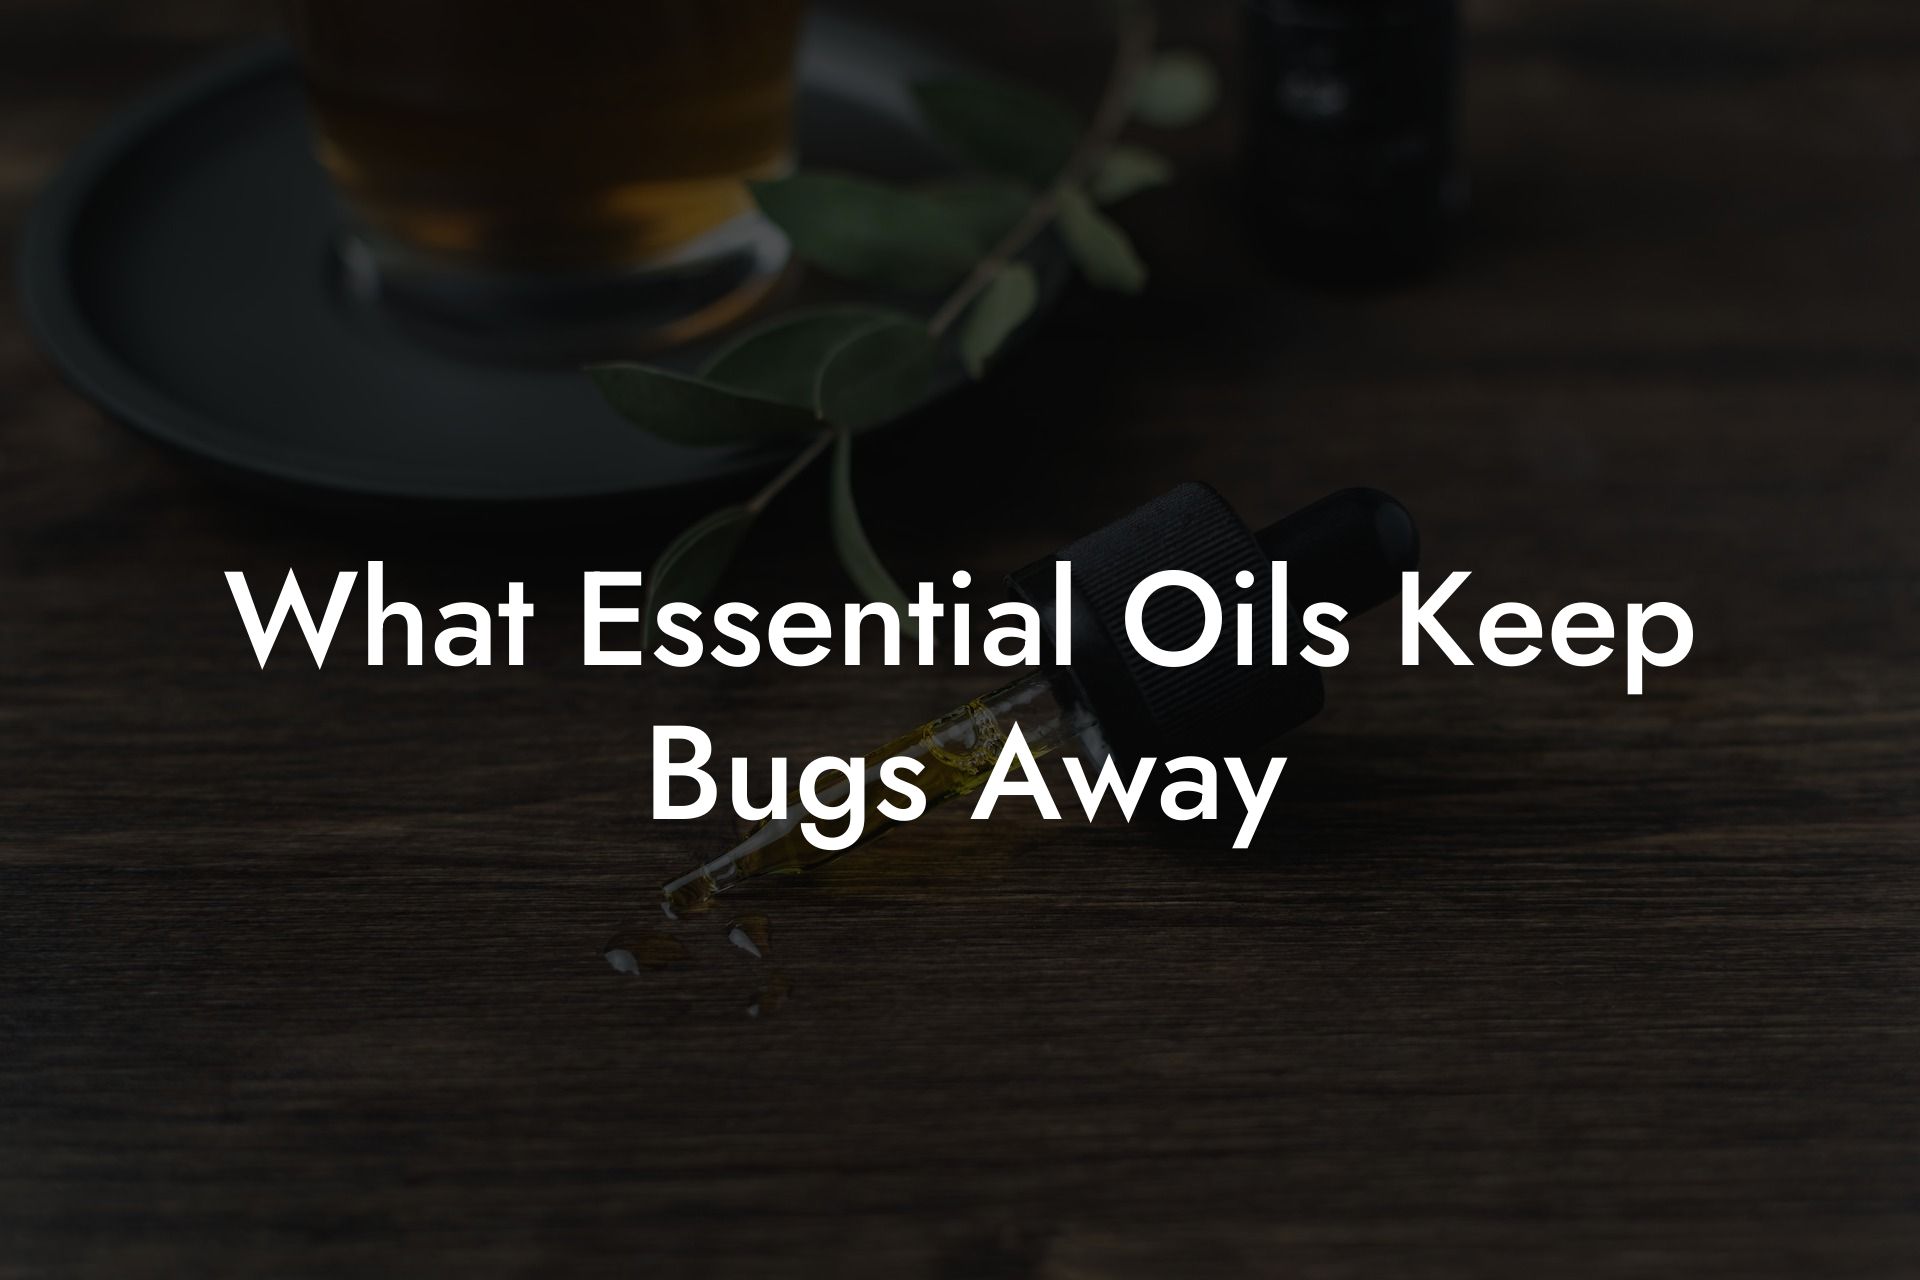 What Essential Oils Keep Bugs Away